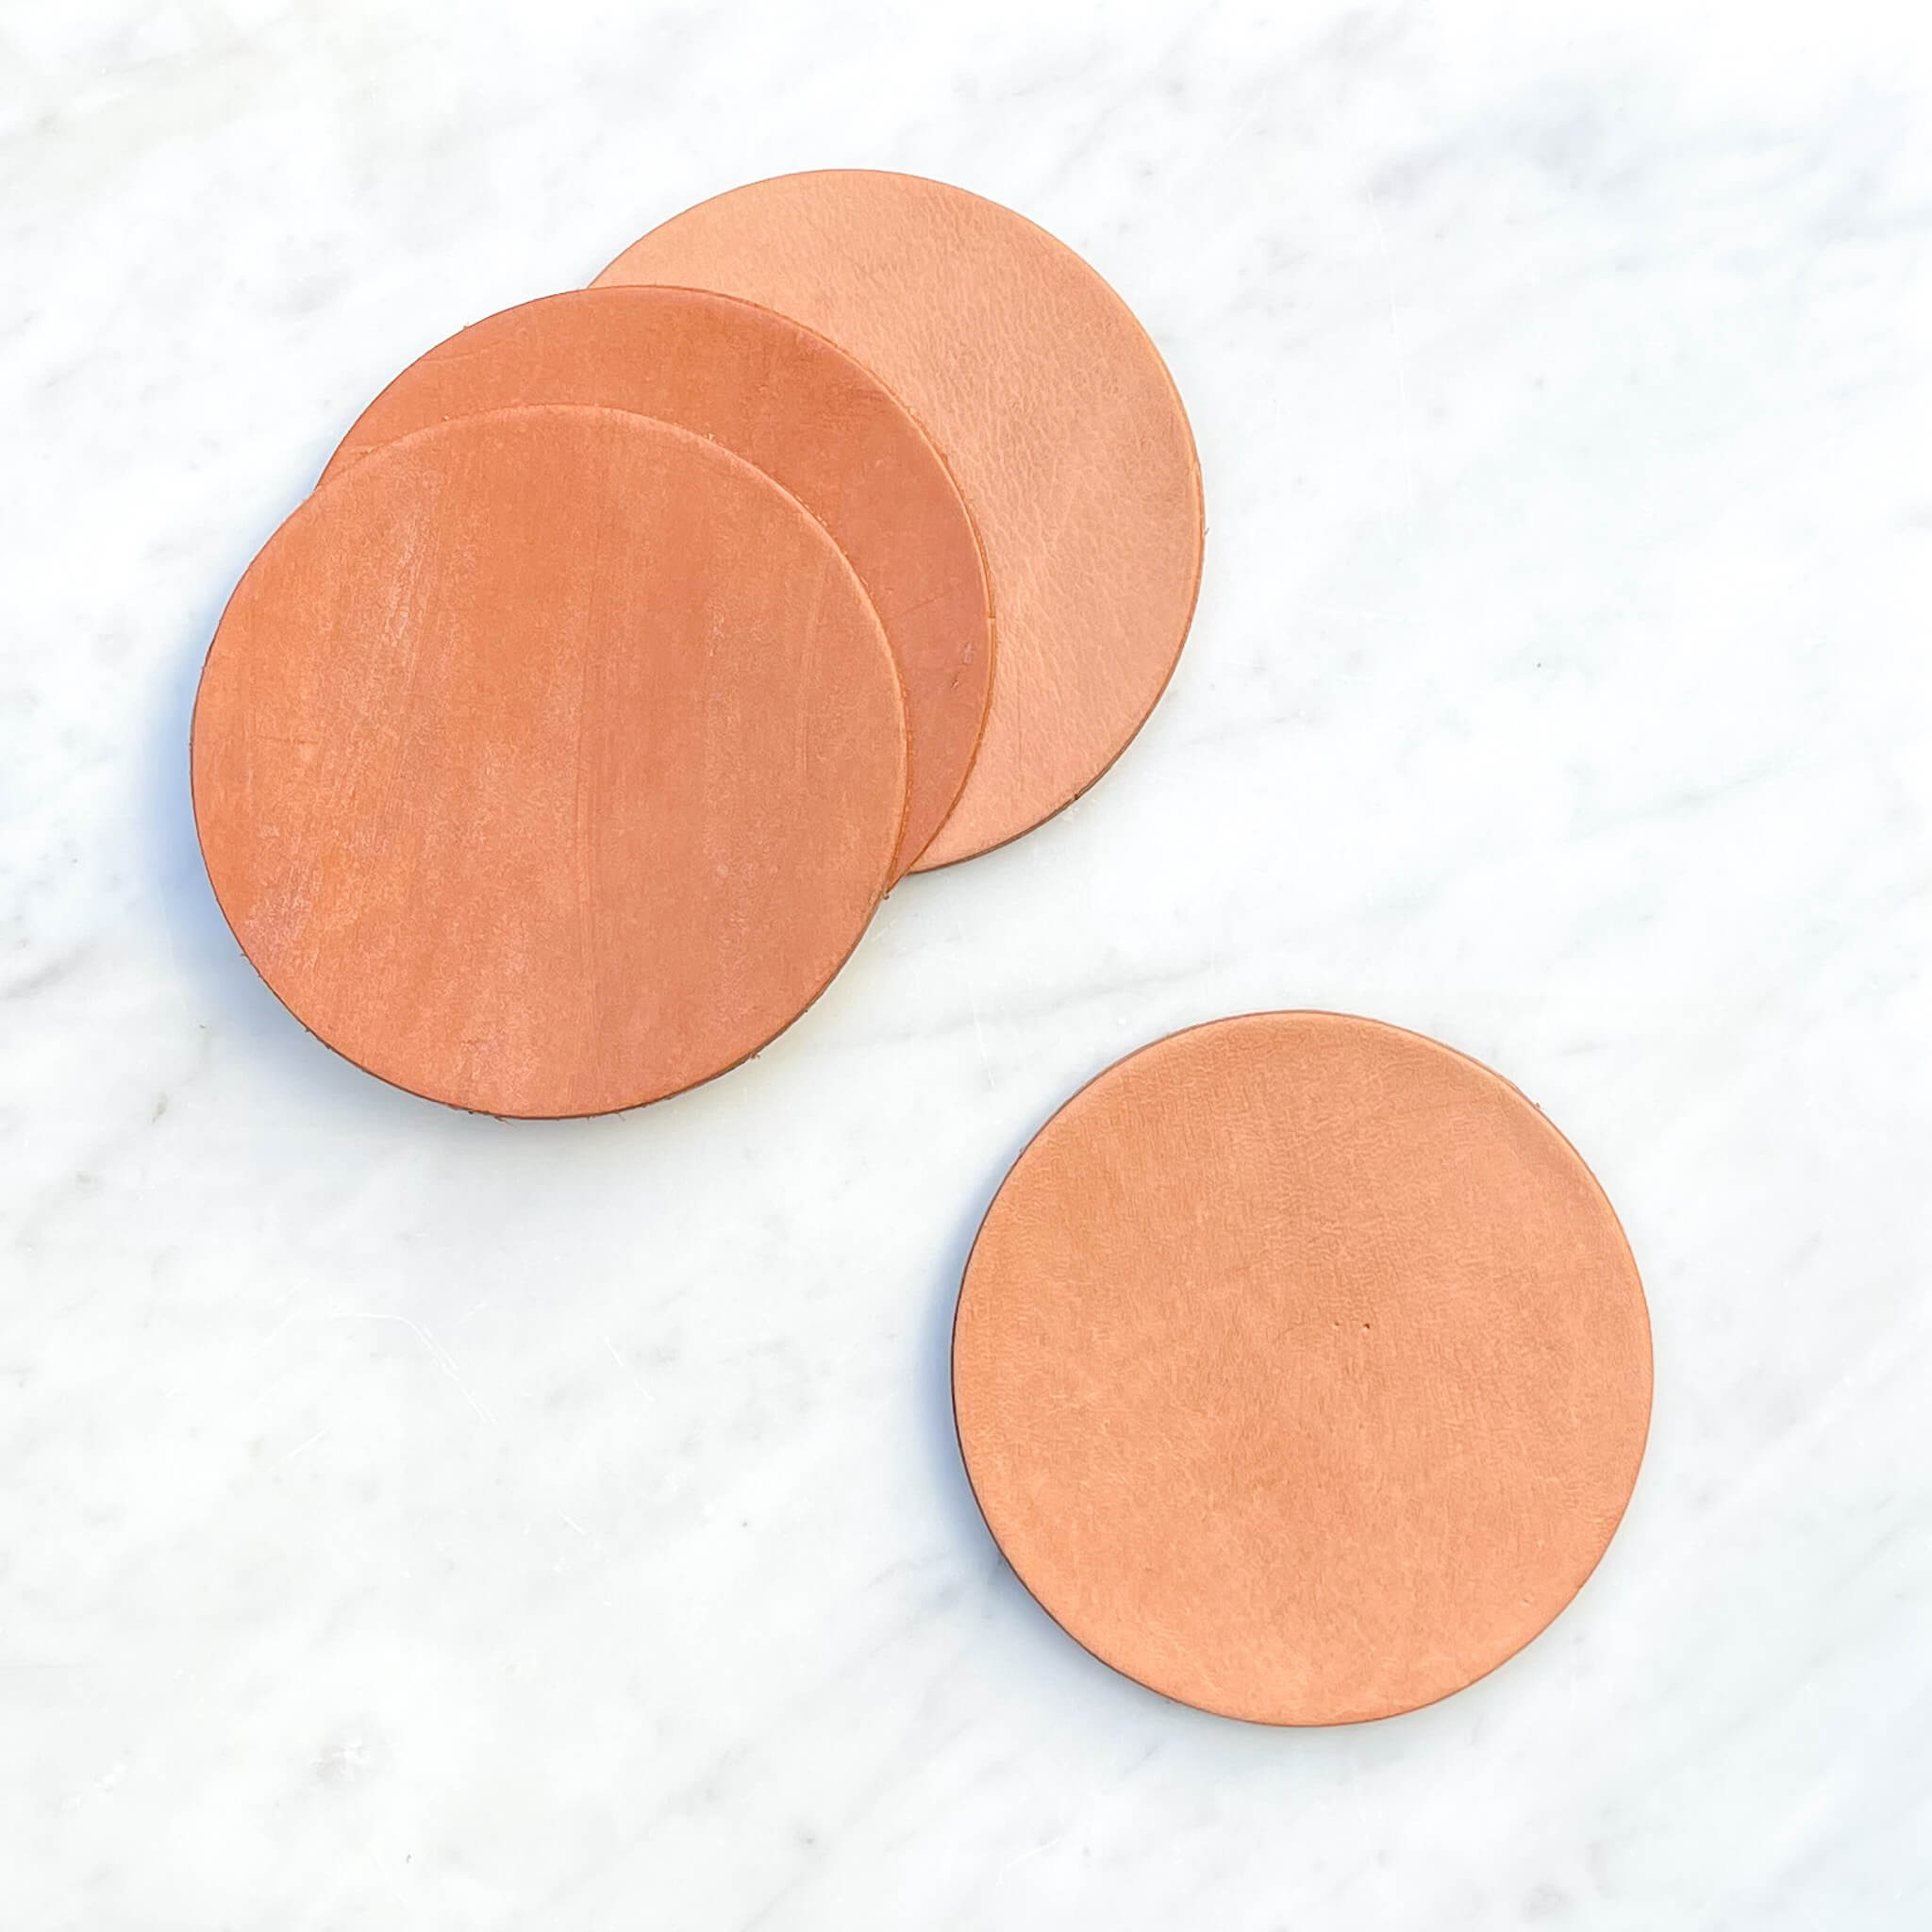 A set of 4 vaquero leather coasters on a marble counter.